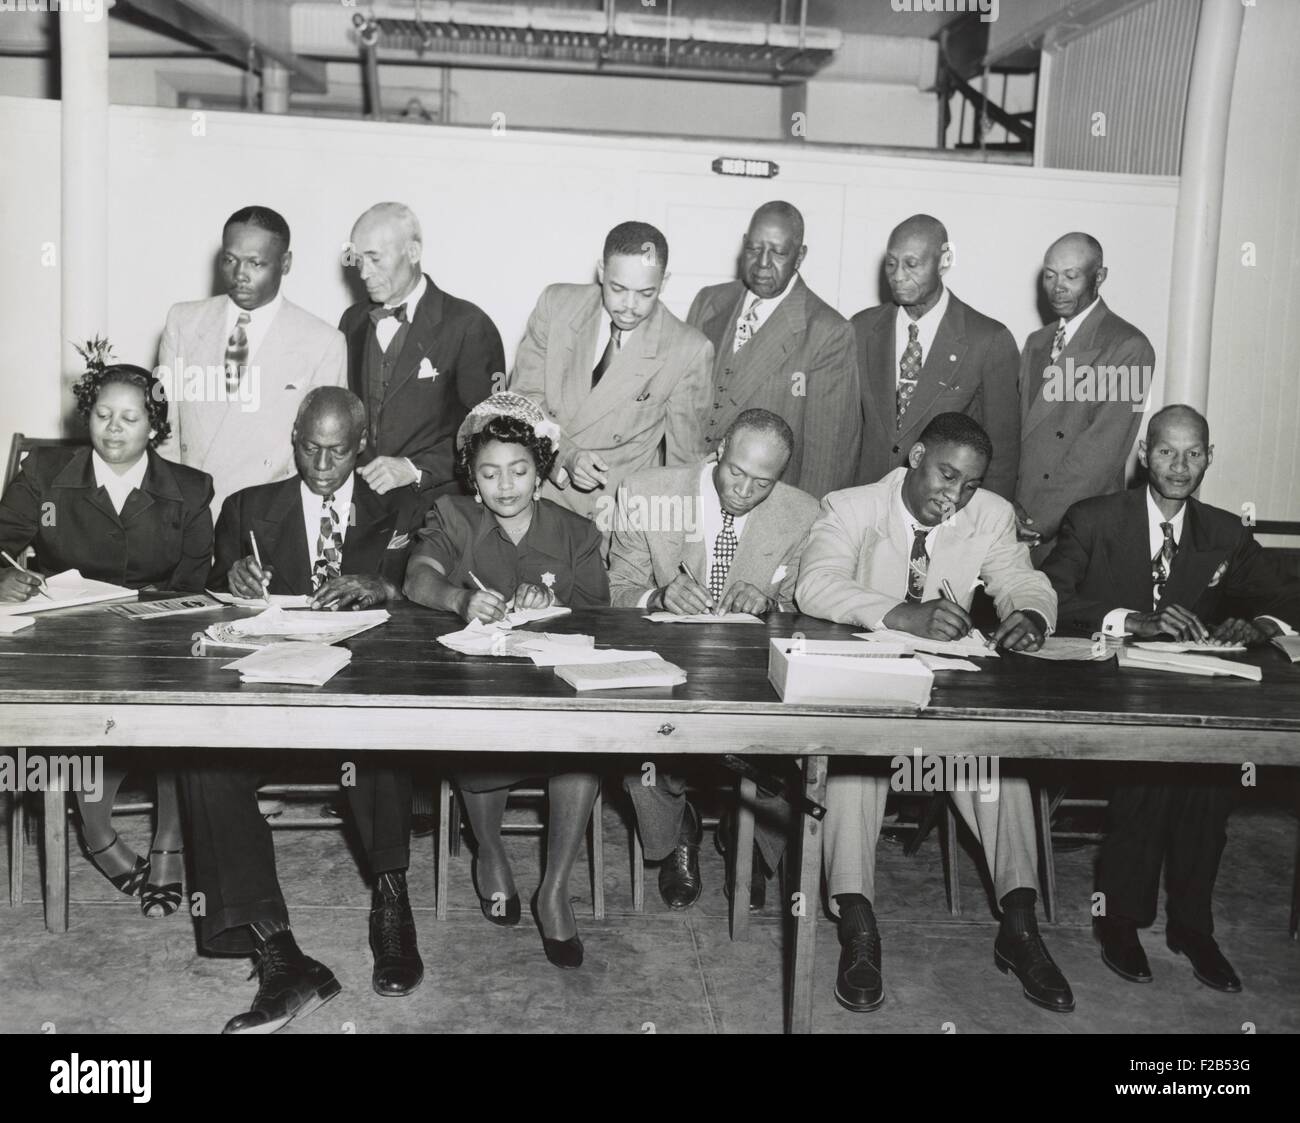 San Antonio Branch of the NAACP planning their 1952 membership campaign. In 1946 the NAACP recorded roughly 600,000 members in the nation-wide grassroots civil rights organization. - (BSLOC 2015 1 102) Stock Photo